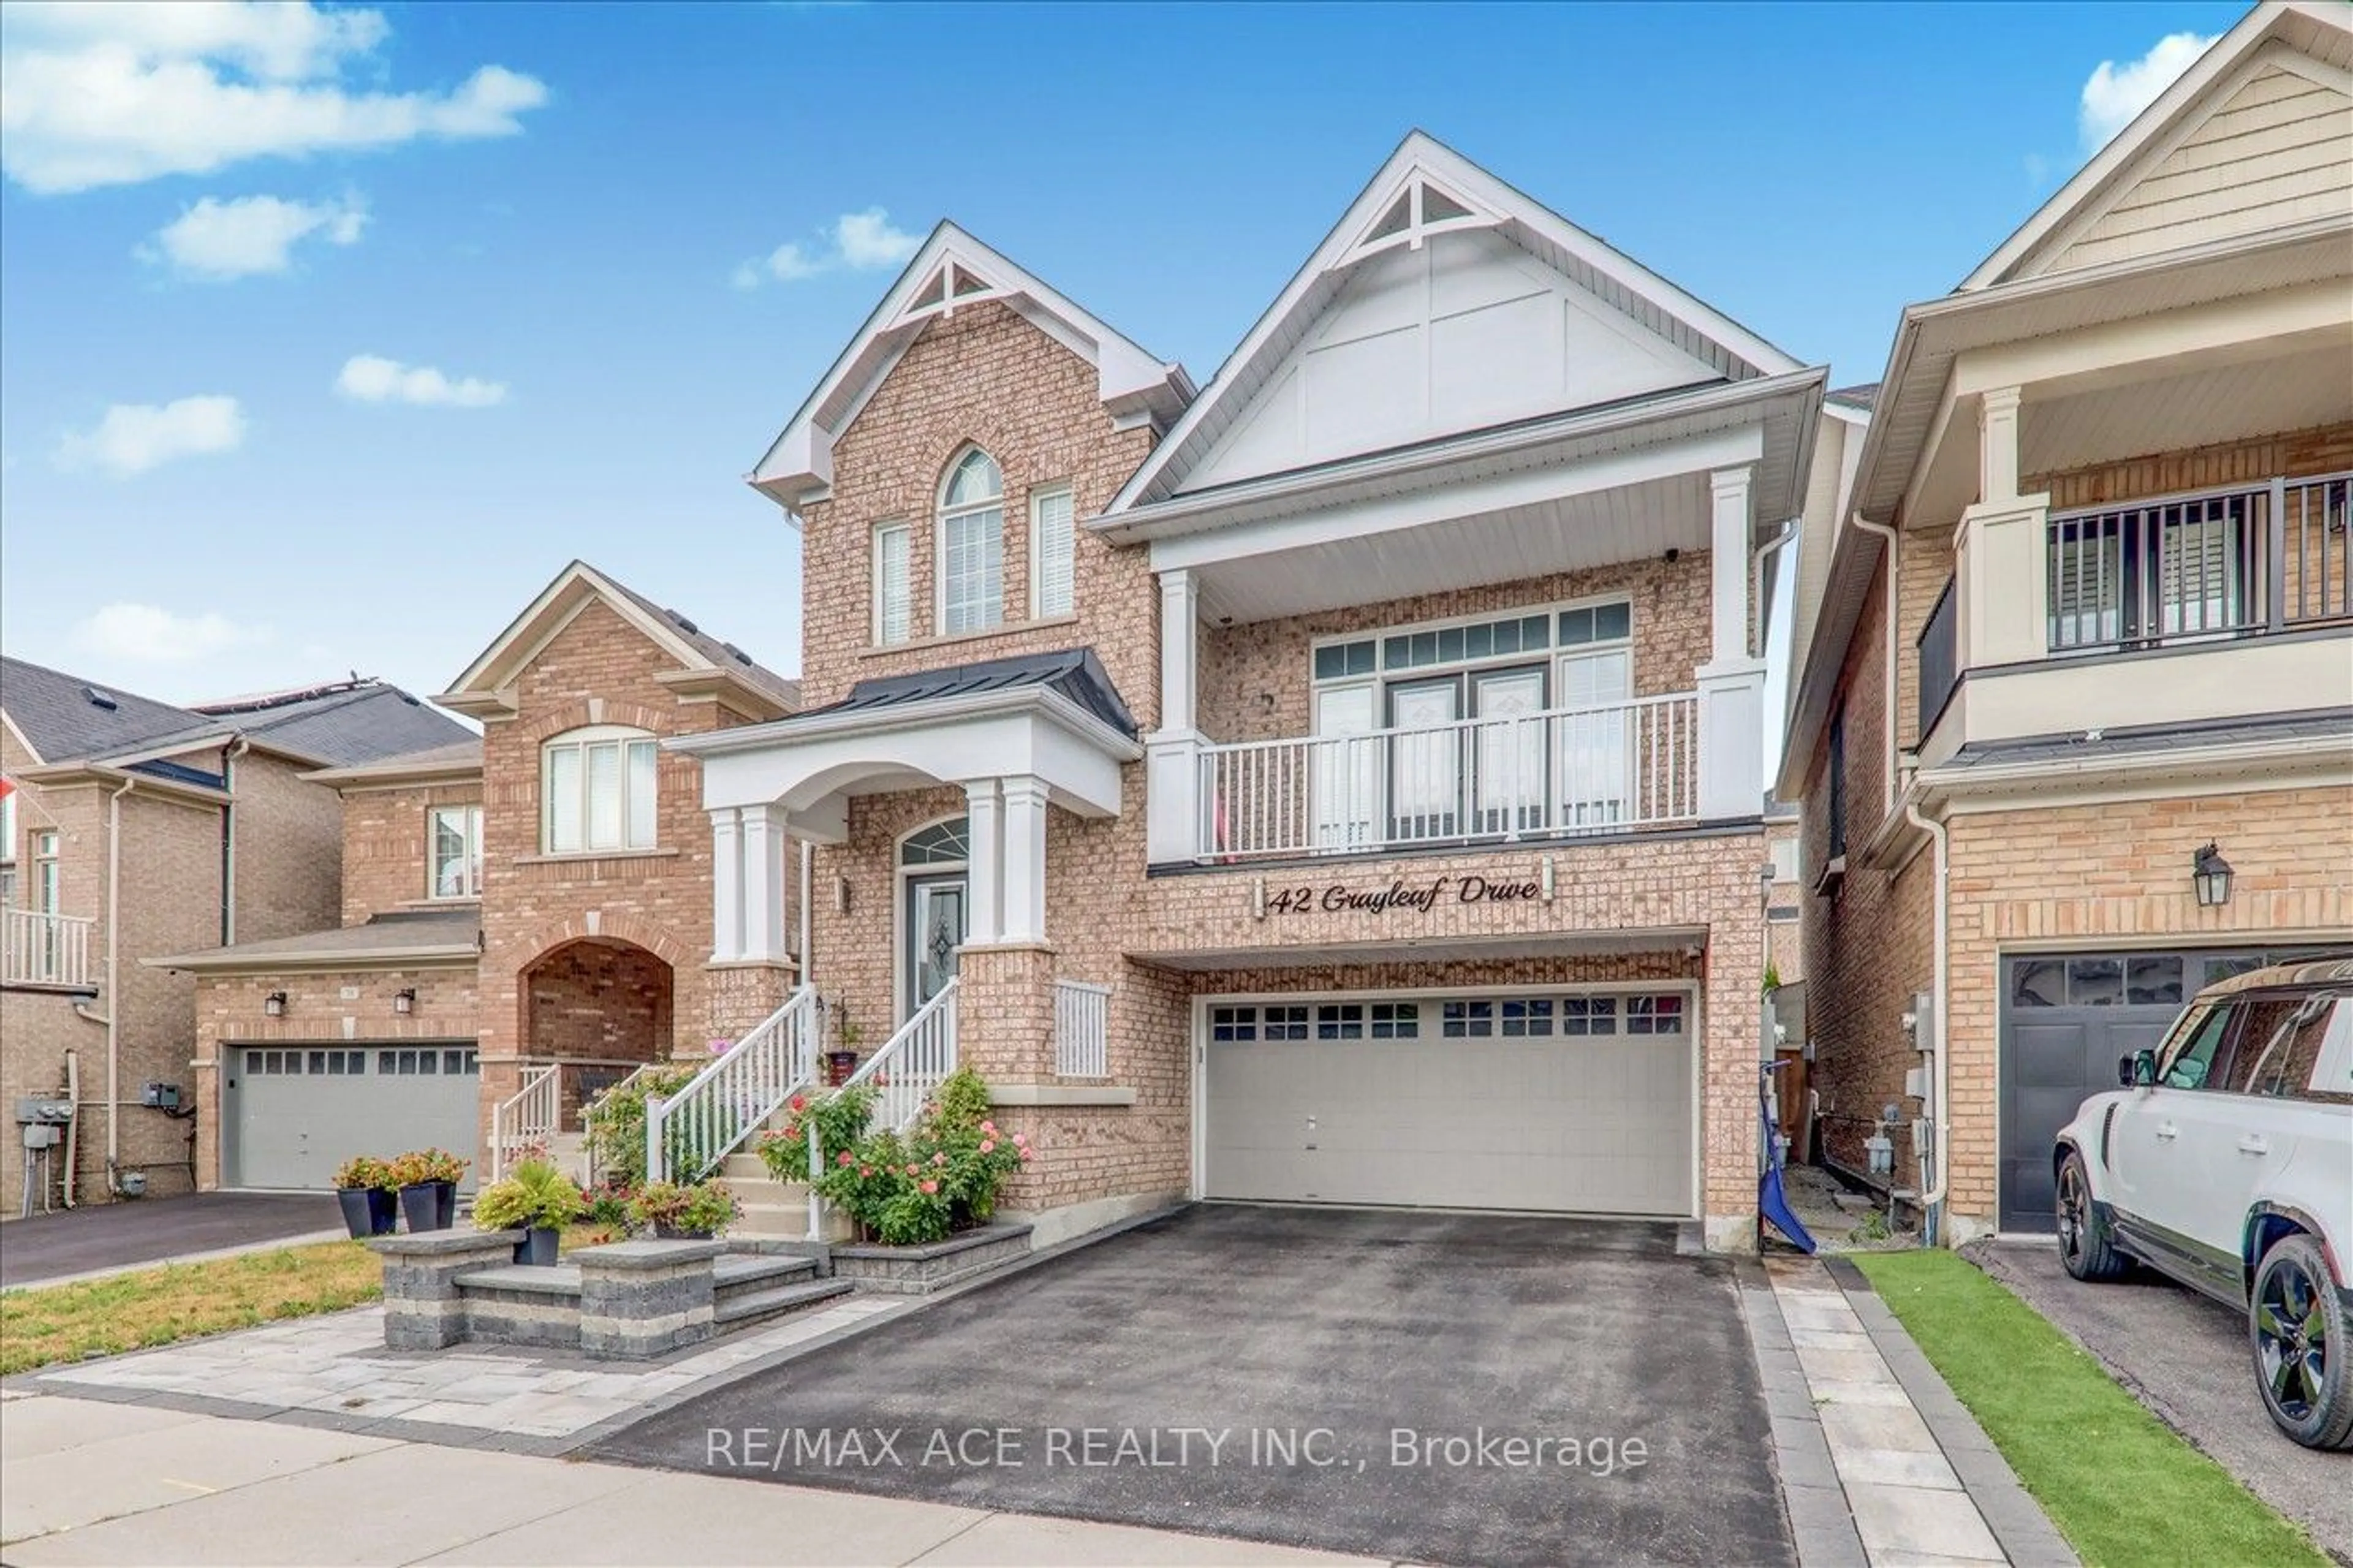 Home with brick exterior material for 42 Grayleaf Dr, Whitchurch-Stouffville Ontario L4A 0C4